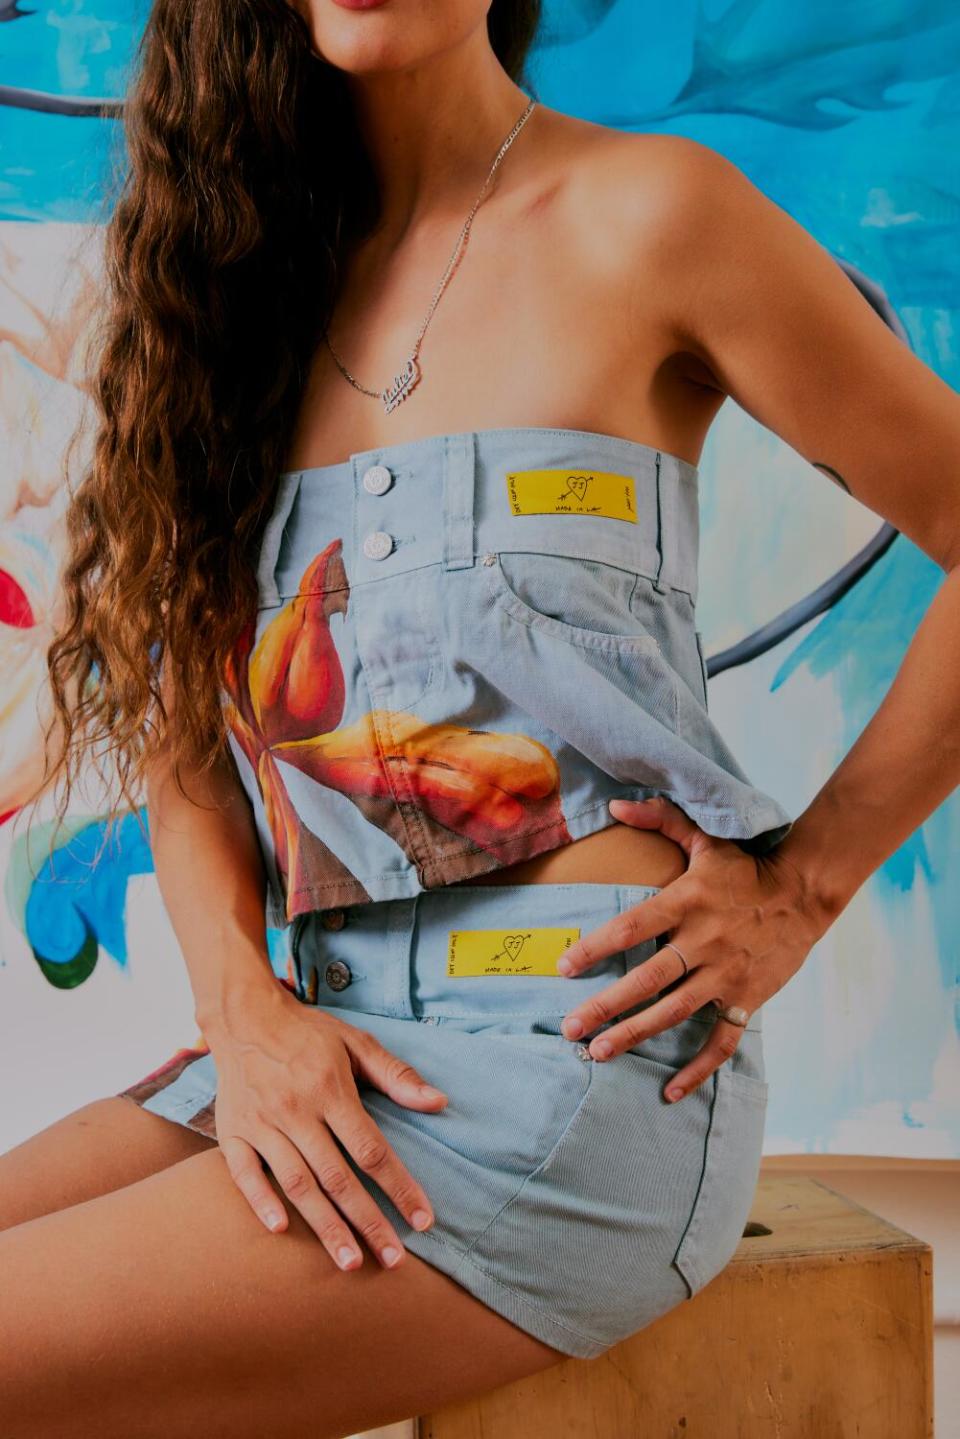 A close-up image of a woman wearing jean shorts as a top and bottom, both painted with orange flowers.